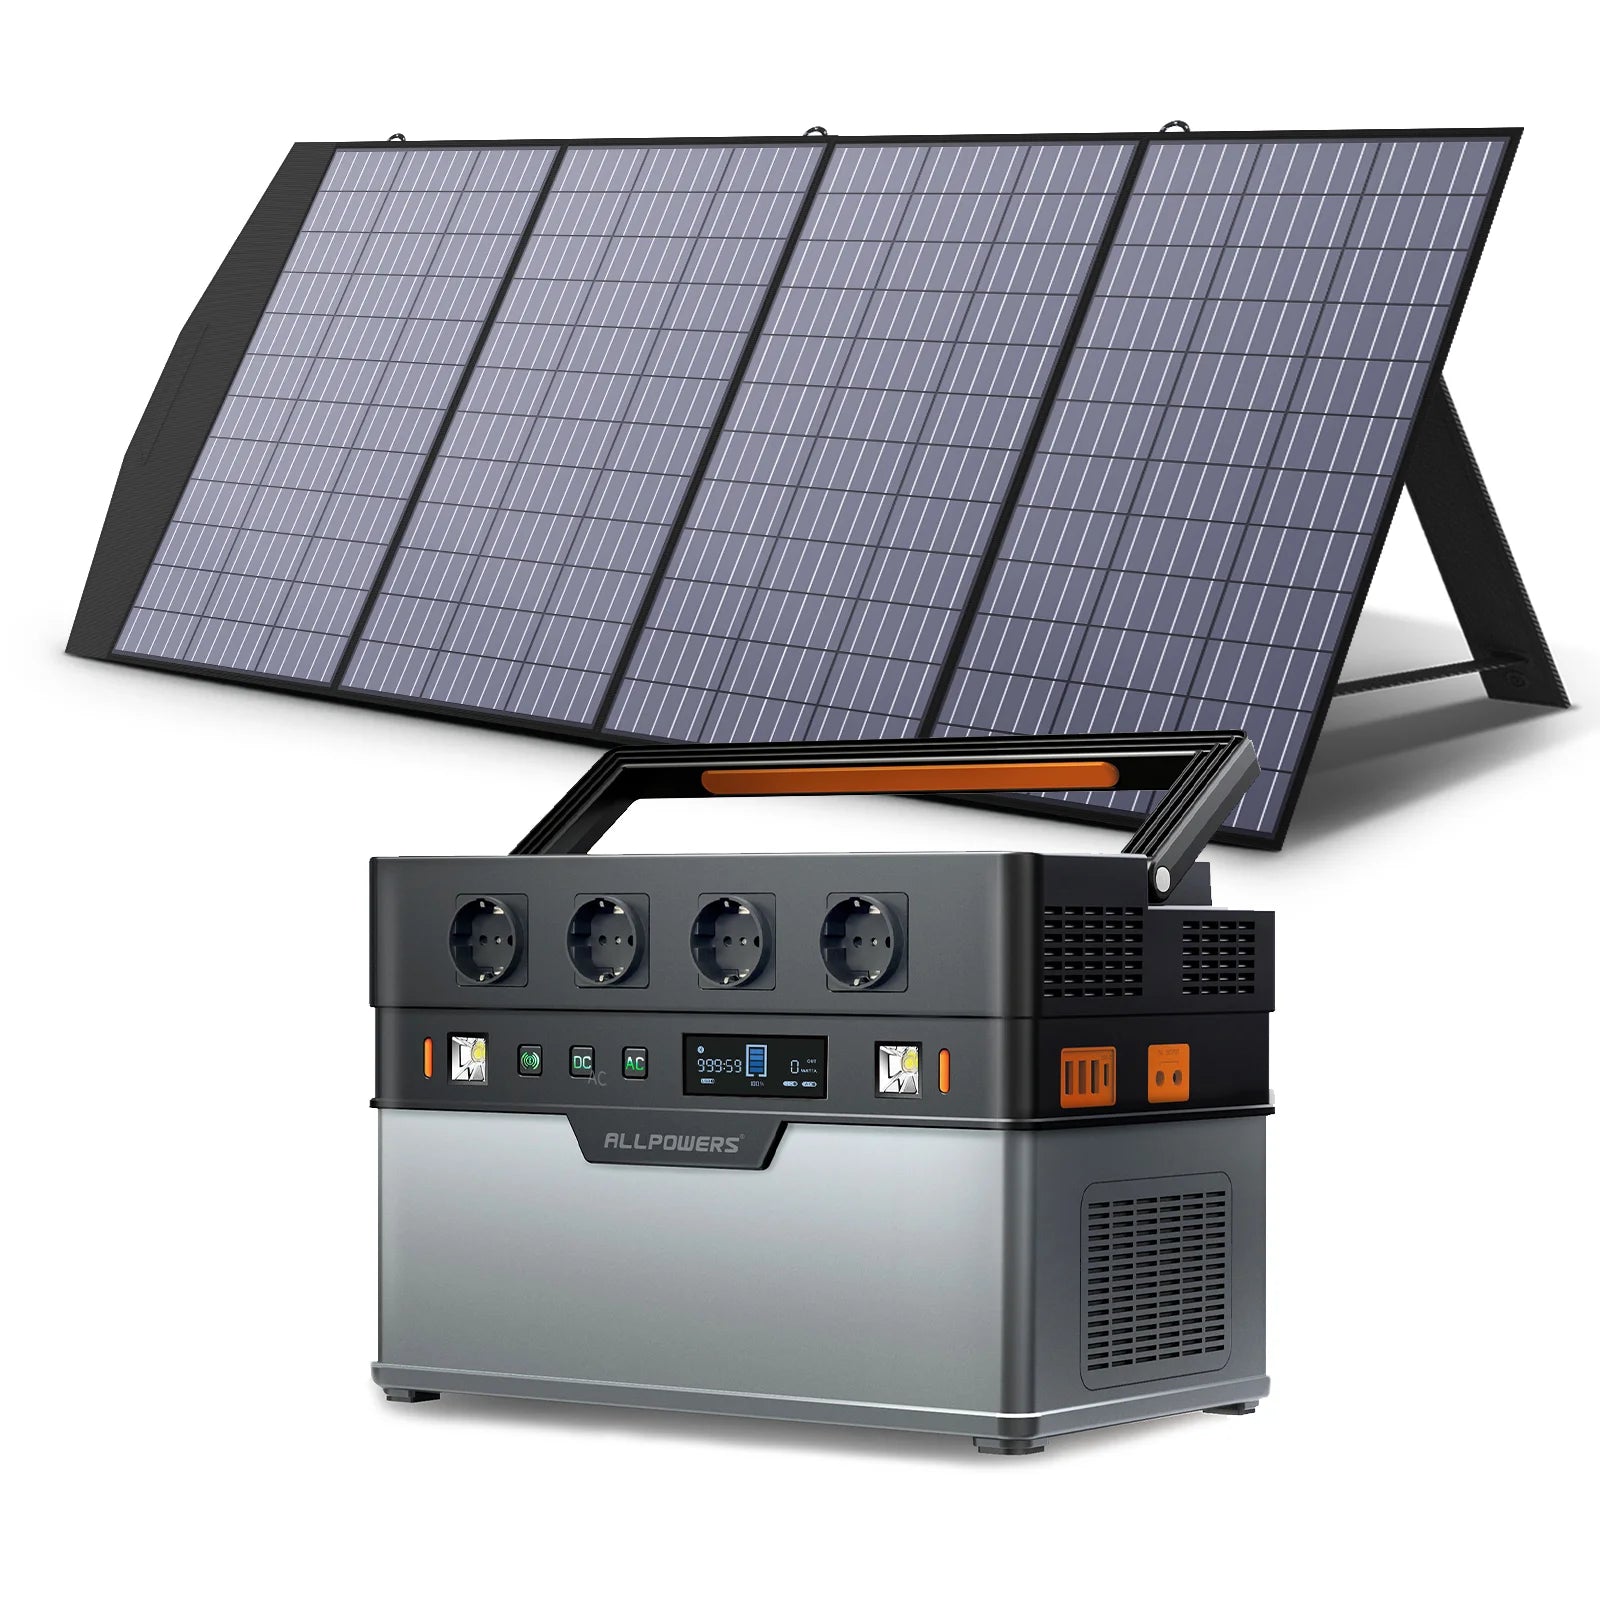 Charges devices safely under direct sunlight using its built-in solar panel.